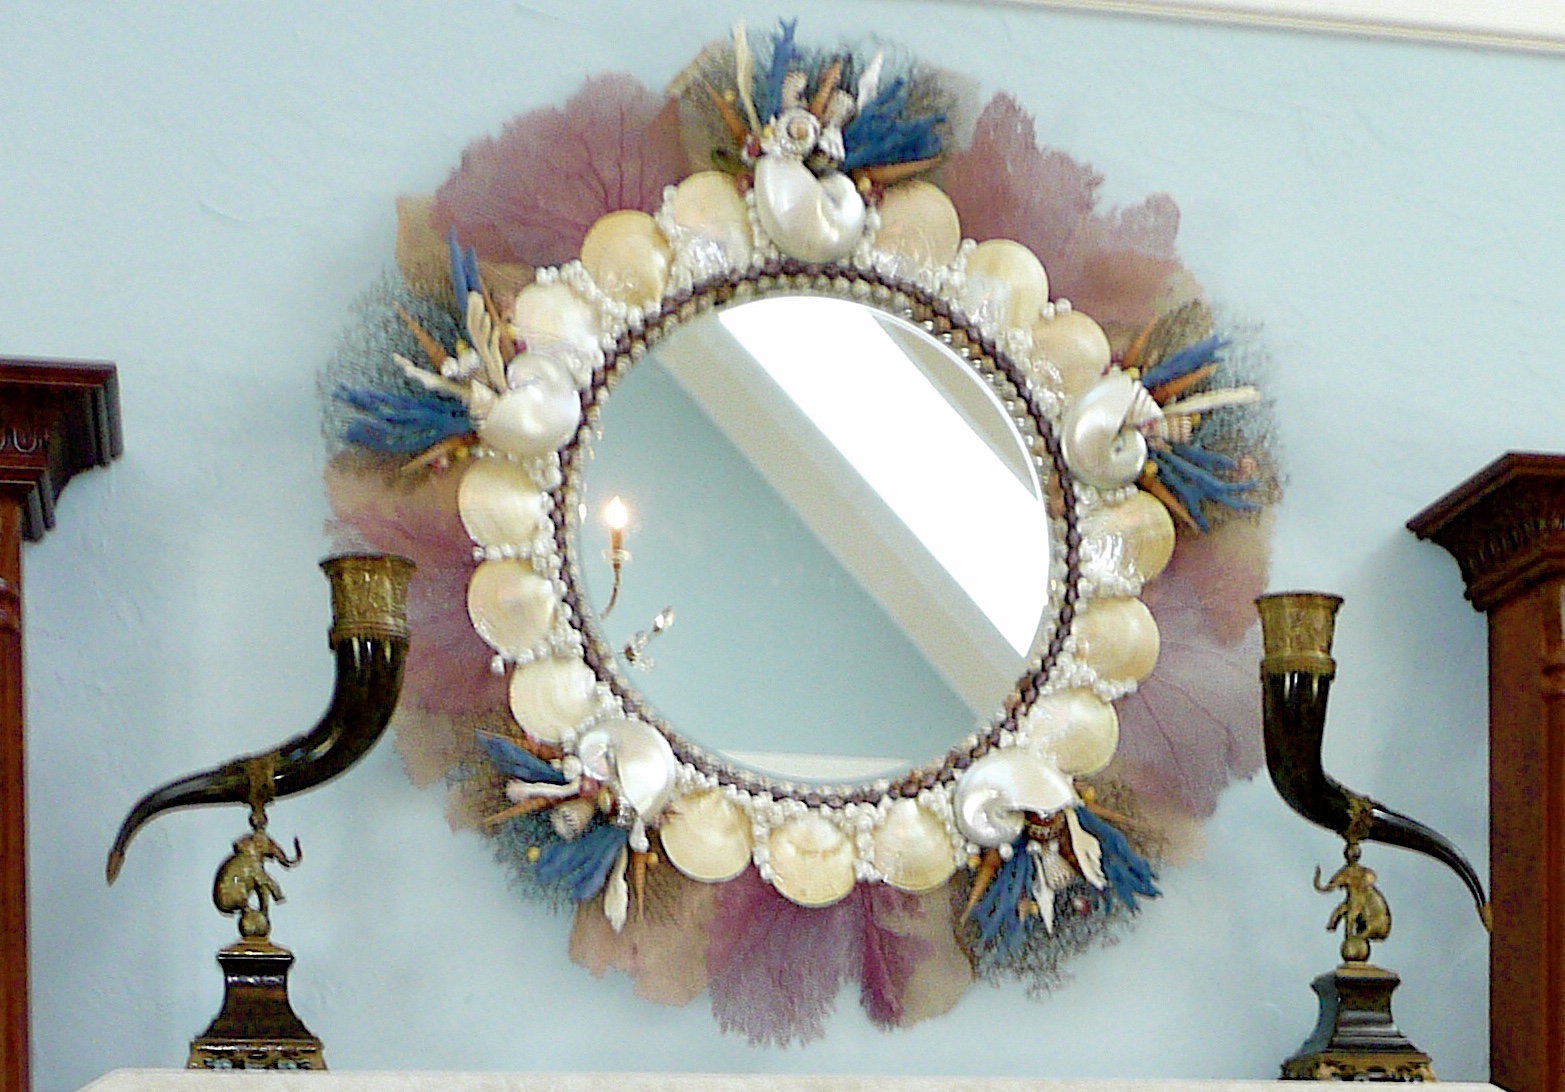 Huge round mirror hanging on a light blue wall. The mirror is made with seashells and large pieces of pink and blue coral protrude all the way around the edges.